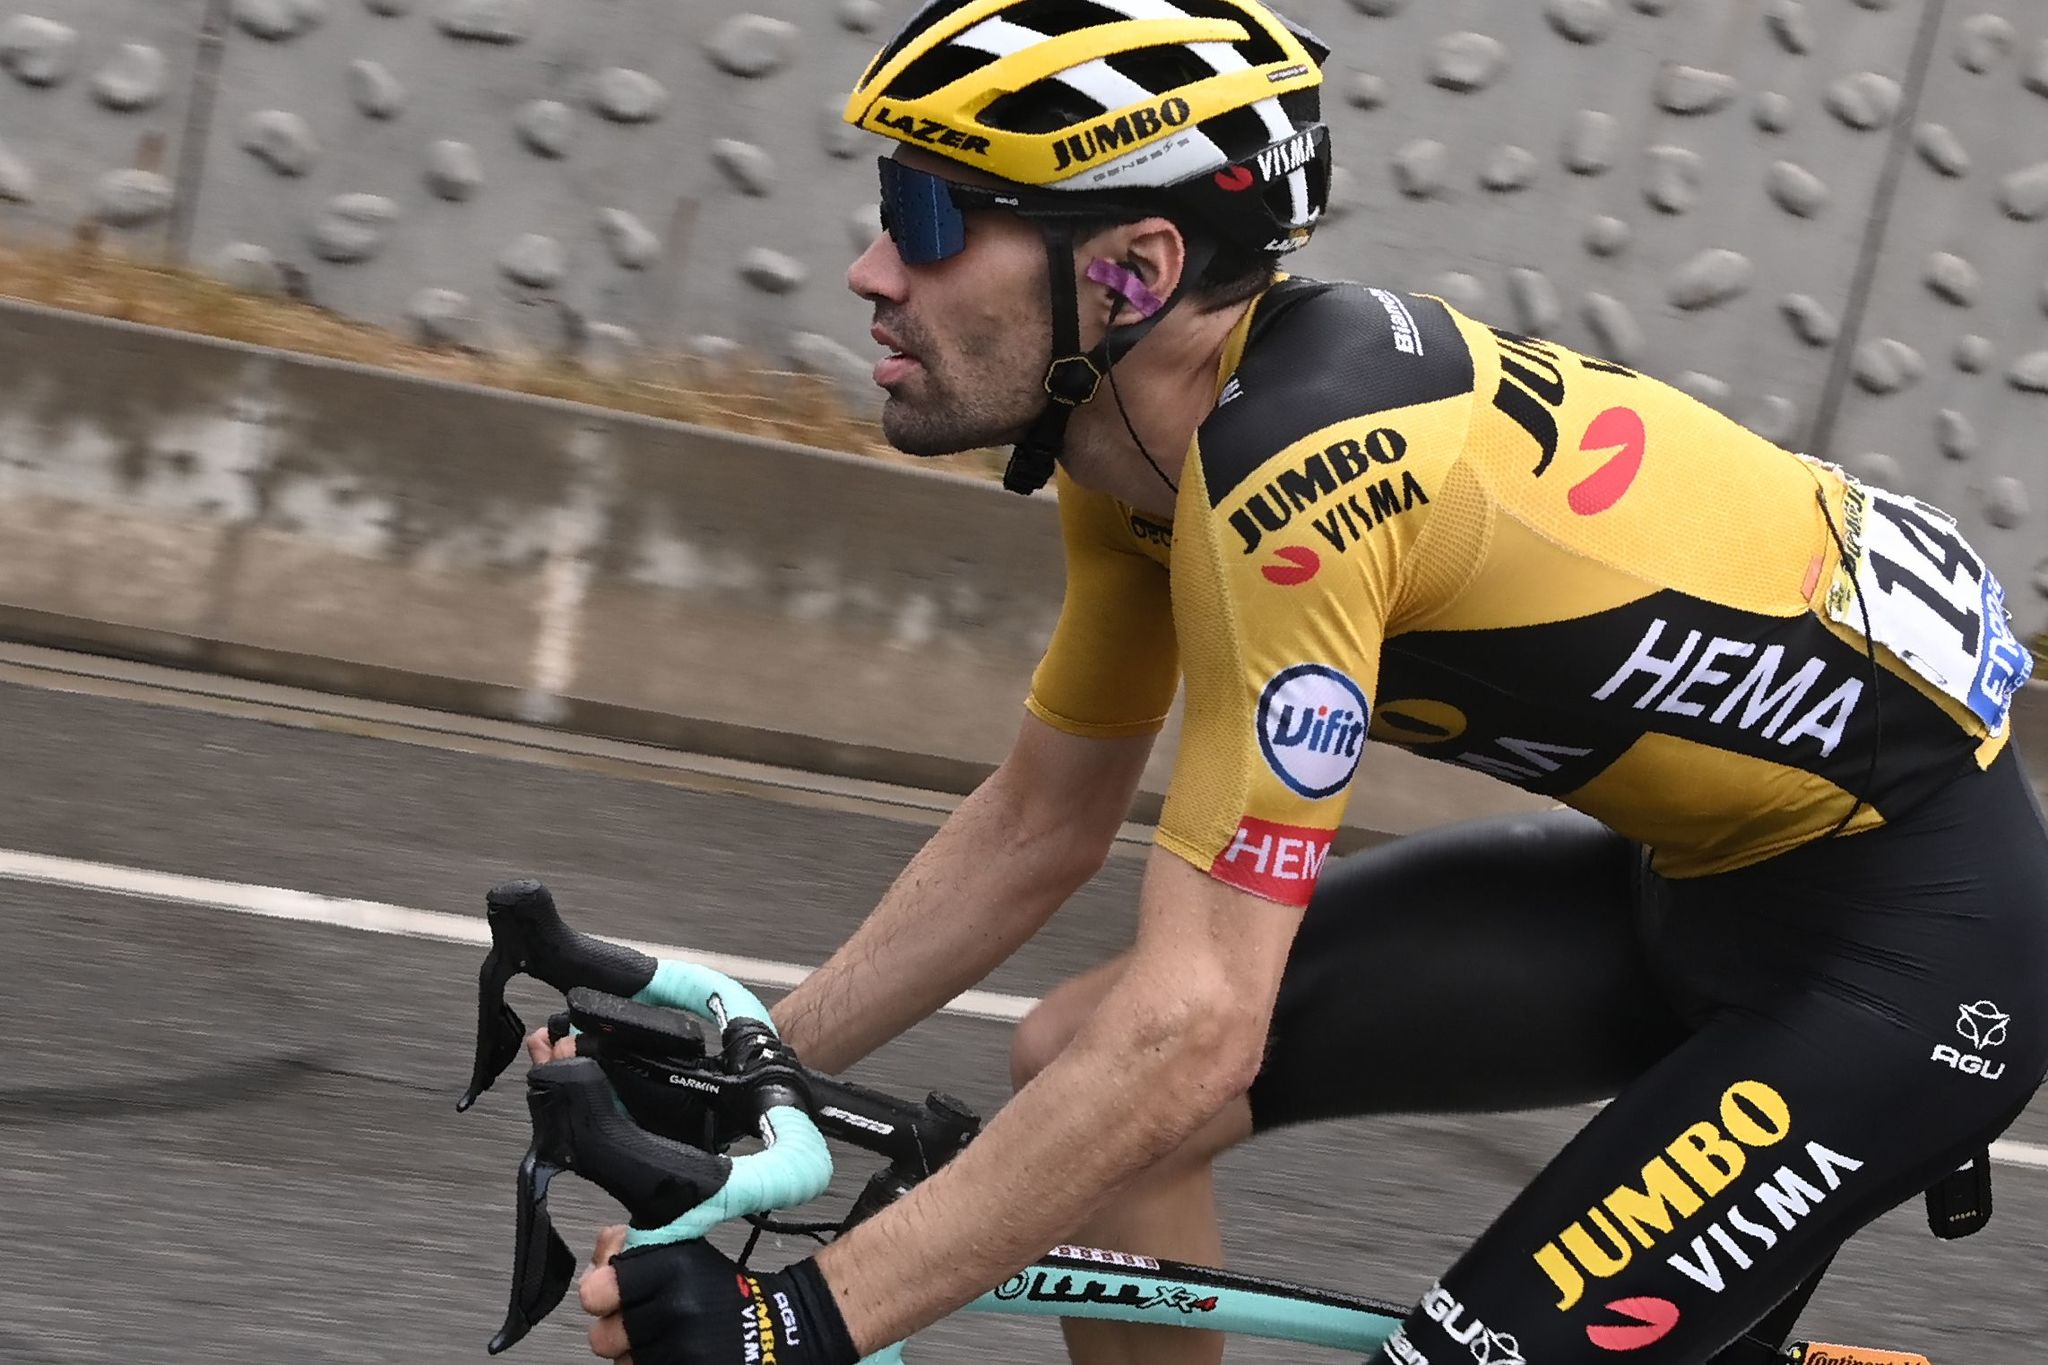 Team Jumbo rider Netherlands' Tom lt;HIT gt;Dumoulin lt;/HIT gt; rides during the 1st stage of the 107th edition of the Tour de France cycling race, 156 km between Nice and Nice, on August 29, 2020. (Photo by Anne-Christine POUJOULAT / AFP)